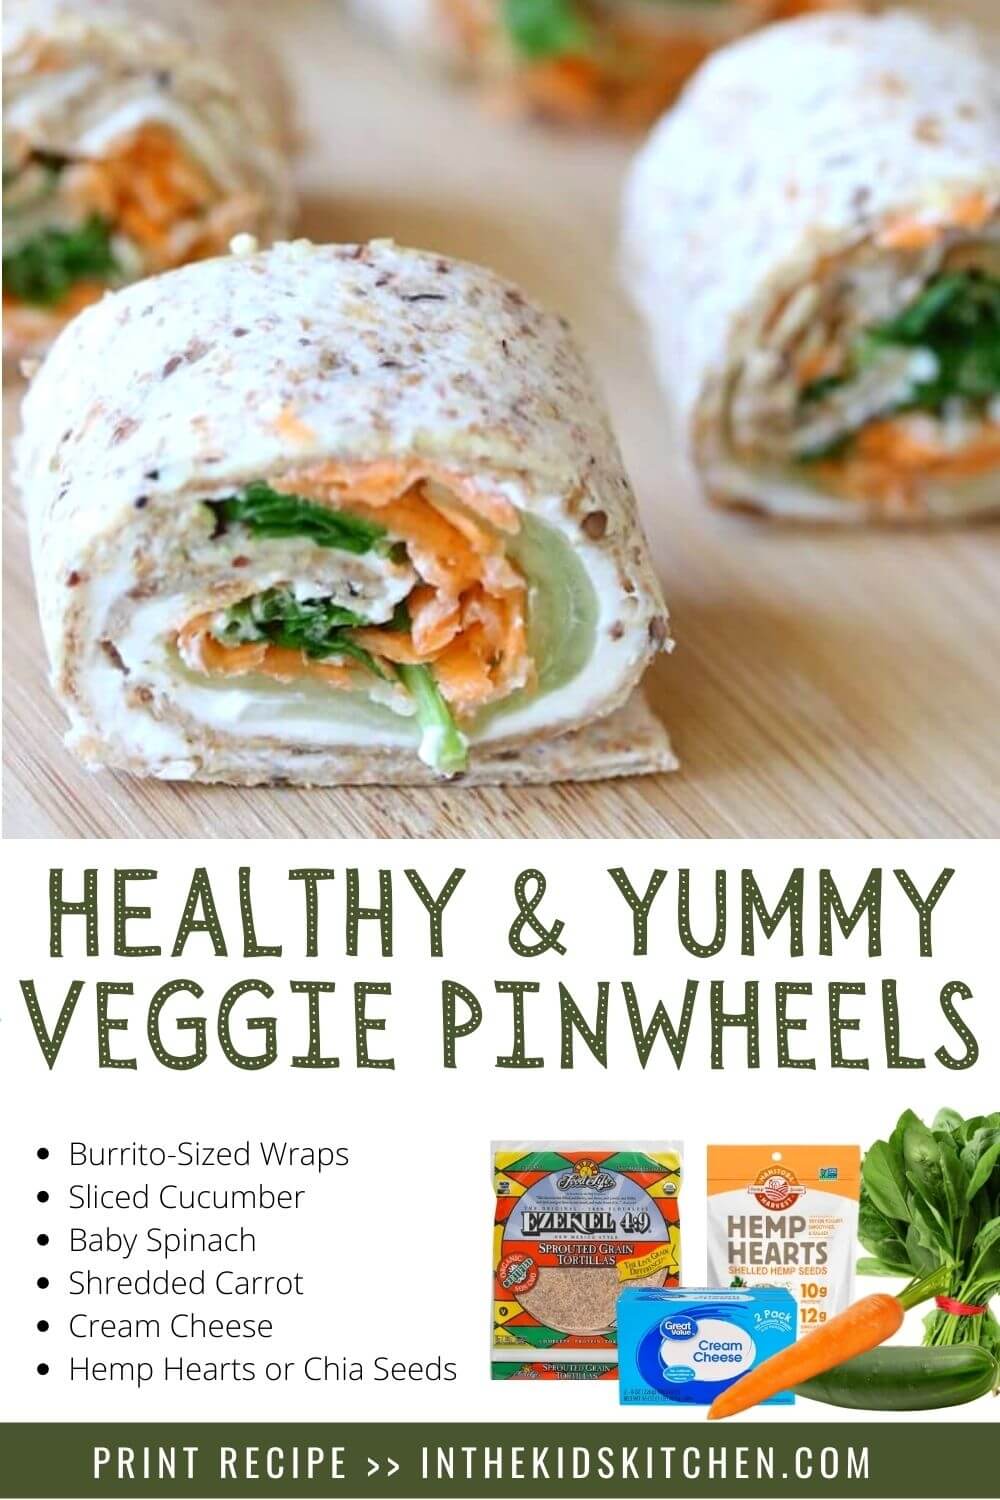 graphic with a photo of veggie pinwheels and a list of their ingredients